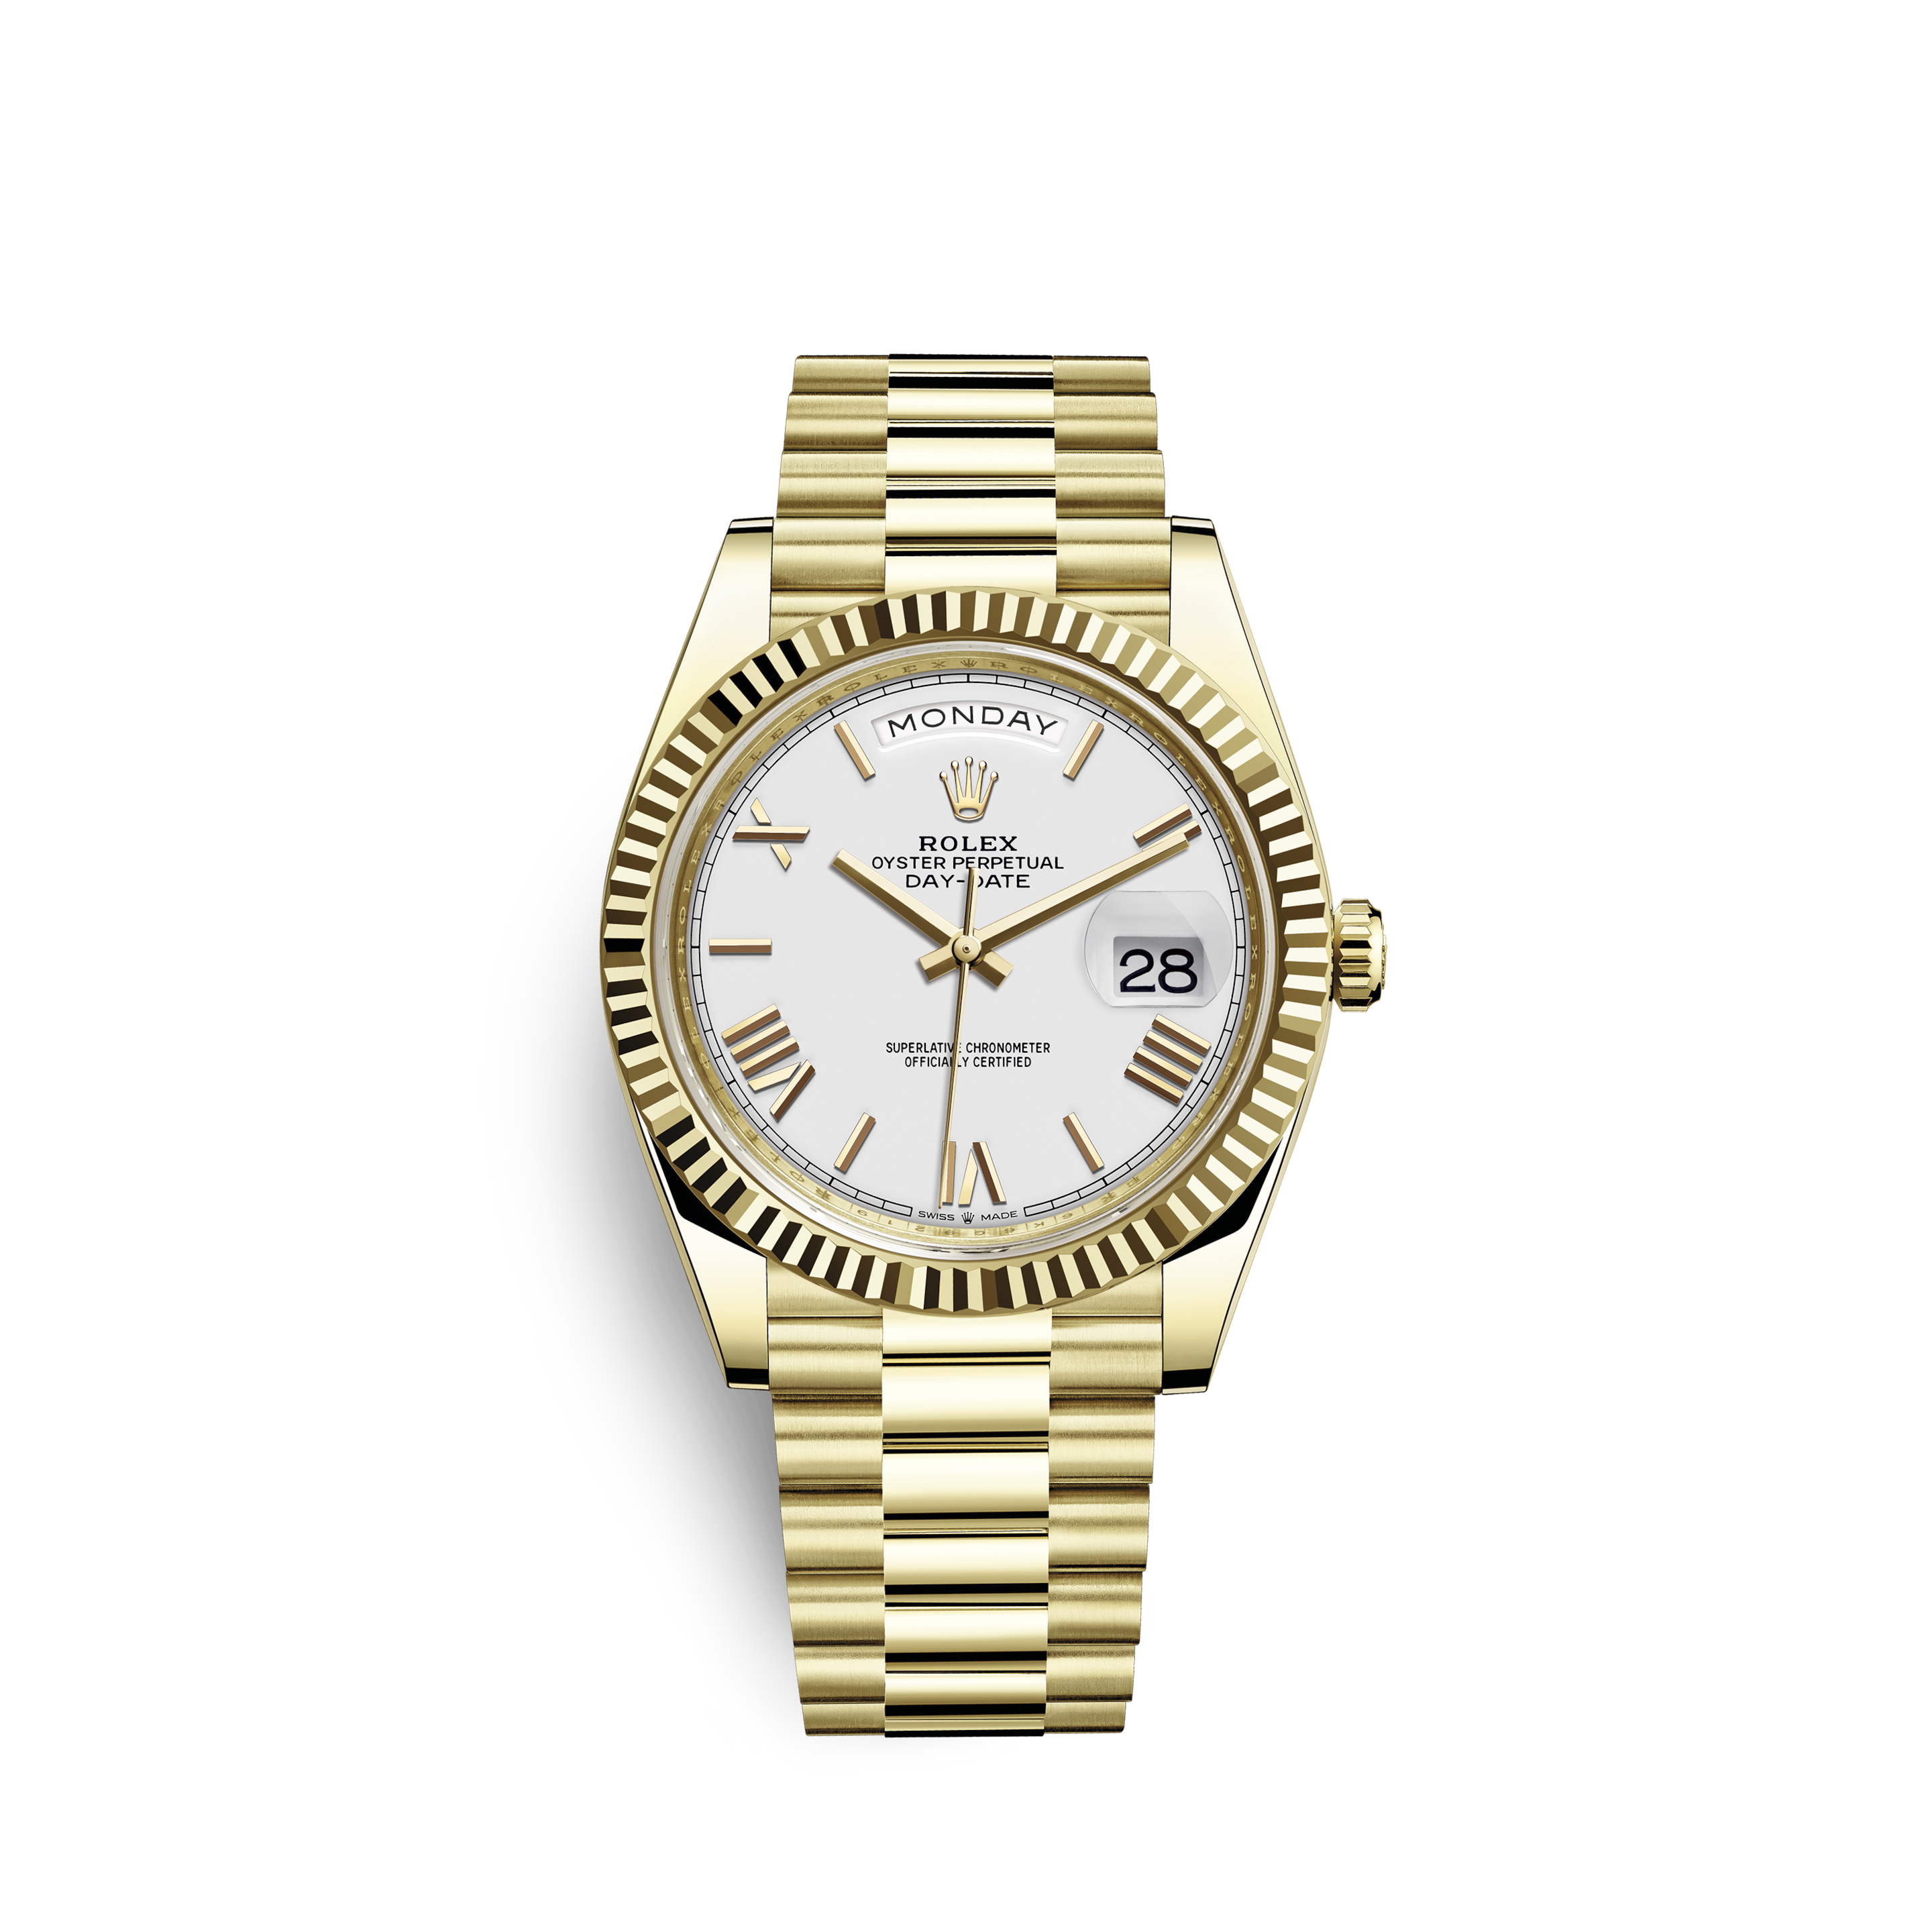 Rolex [204] K No. 2001 Manufactured PRODUCT ROLEX Rolex Oyster Perpetual 76080 Pink 3, 6, 9 Dial SS Stainless Steel Automatic Women's Watch WatchRolex [204] K No. 2001 Manufactured PRODUCT ROLEX Rolex Datejust Diamond Bezel 179369 White Dial WG Solid White Gold Automatic Date Display Women's Watch Watch